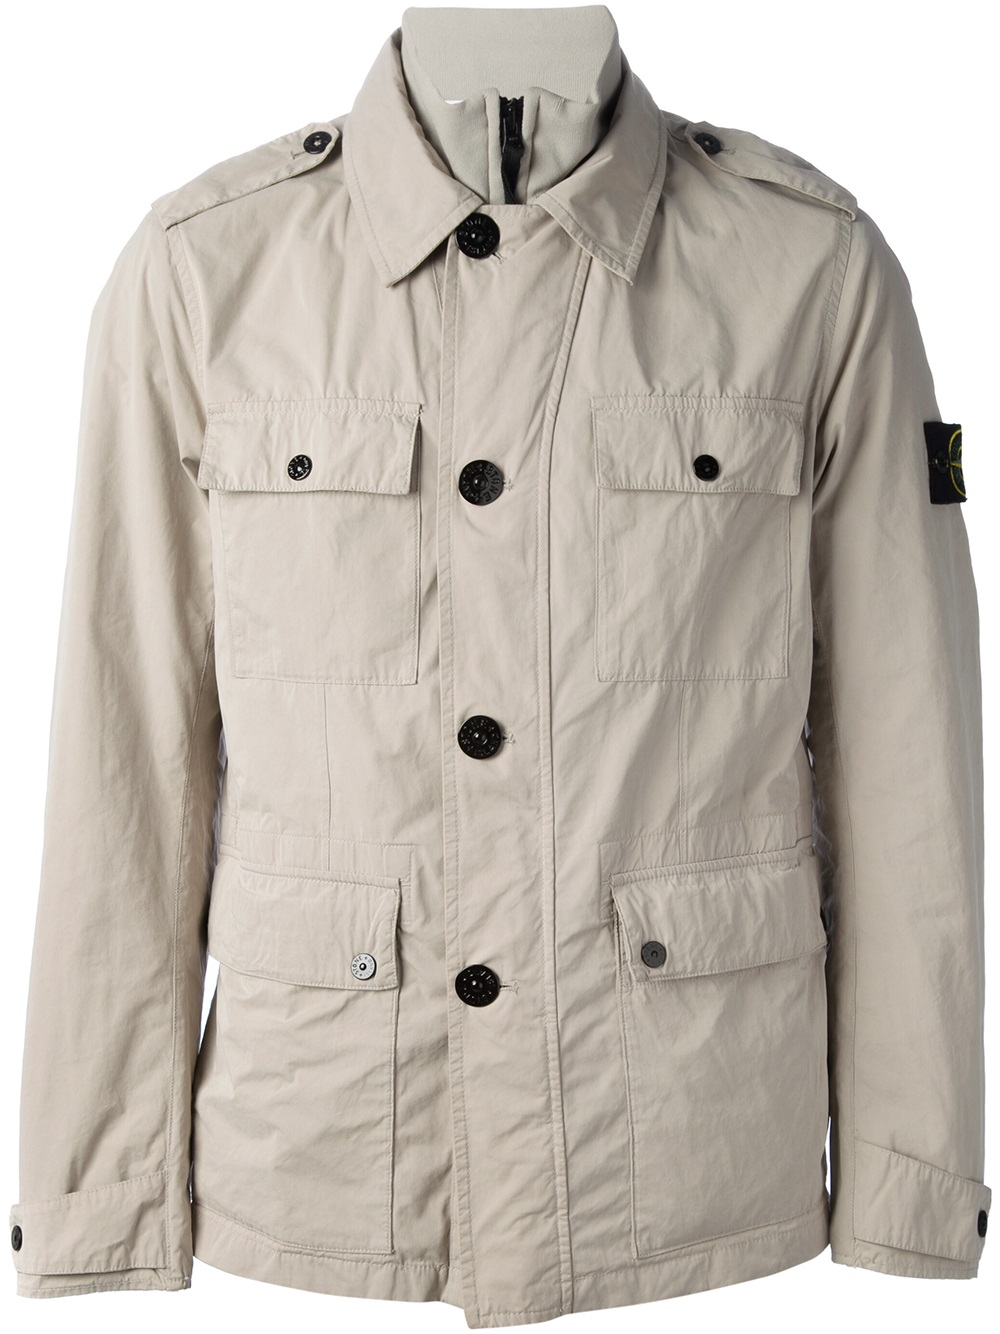 Lyst - Stone Island Soft Field Jacket in Natural for Men